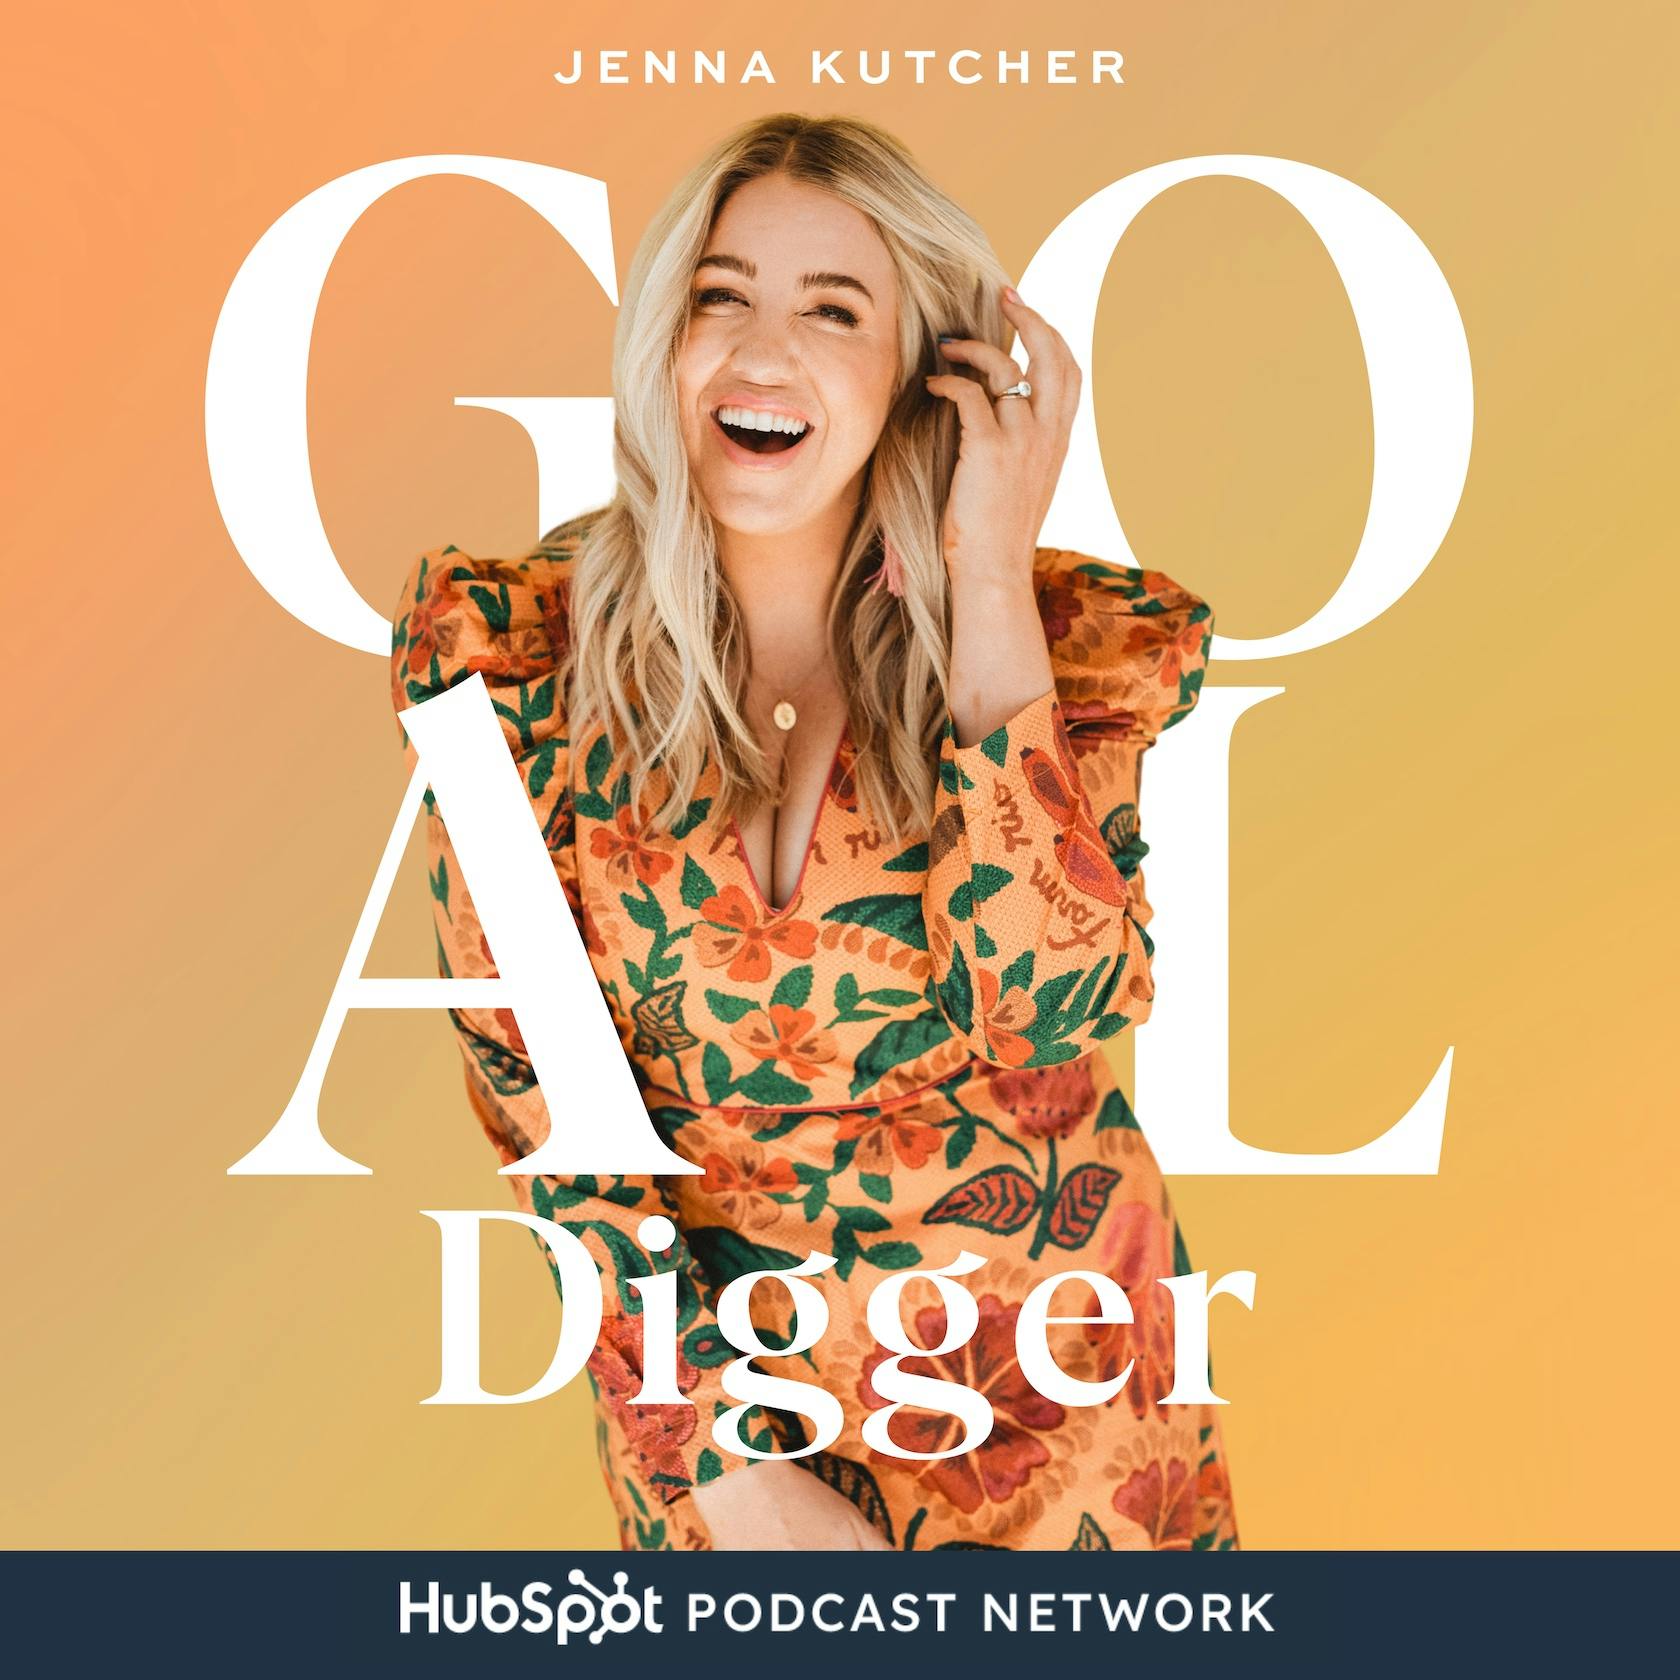 598: 14 Ways to Get Started as an Influencer Right Now